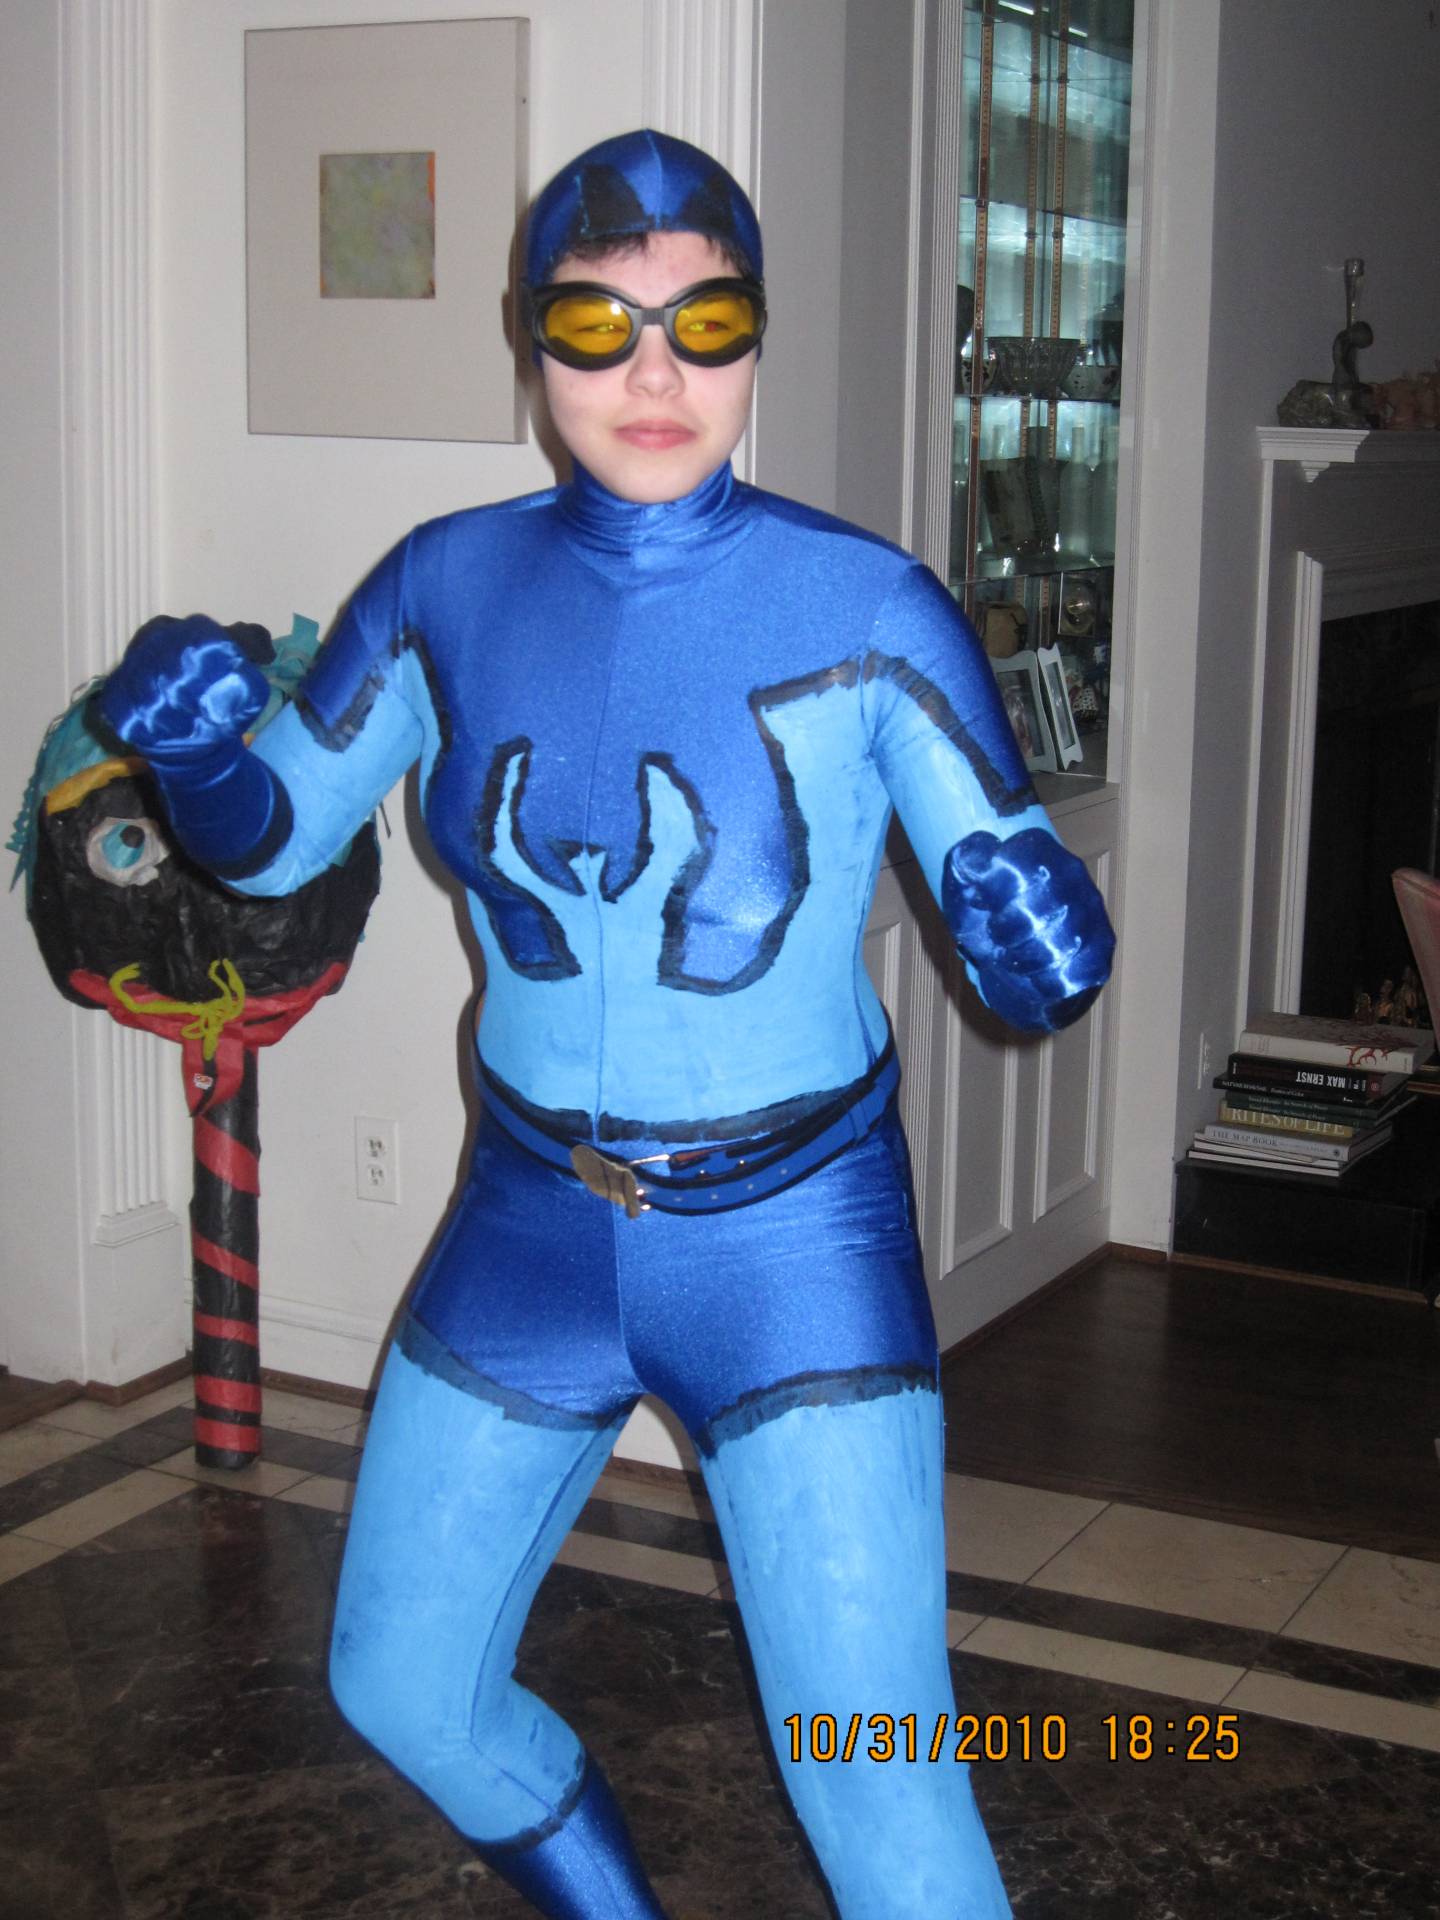  IS THIS NOT TED KORD-IAN ENOUGH FOR YOU?